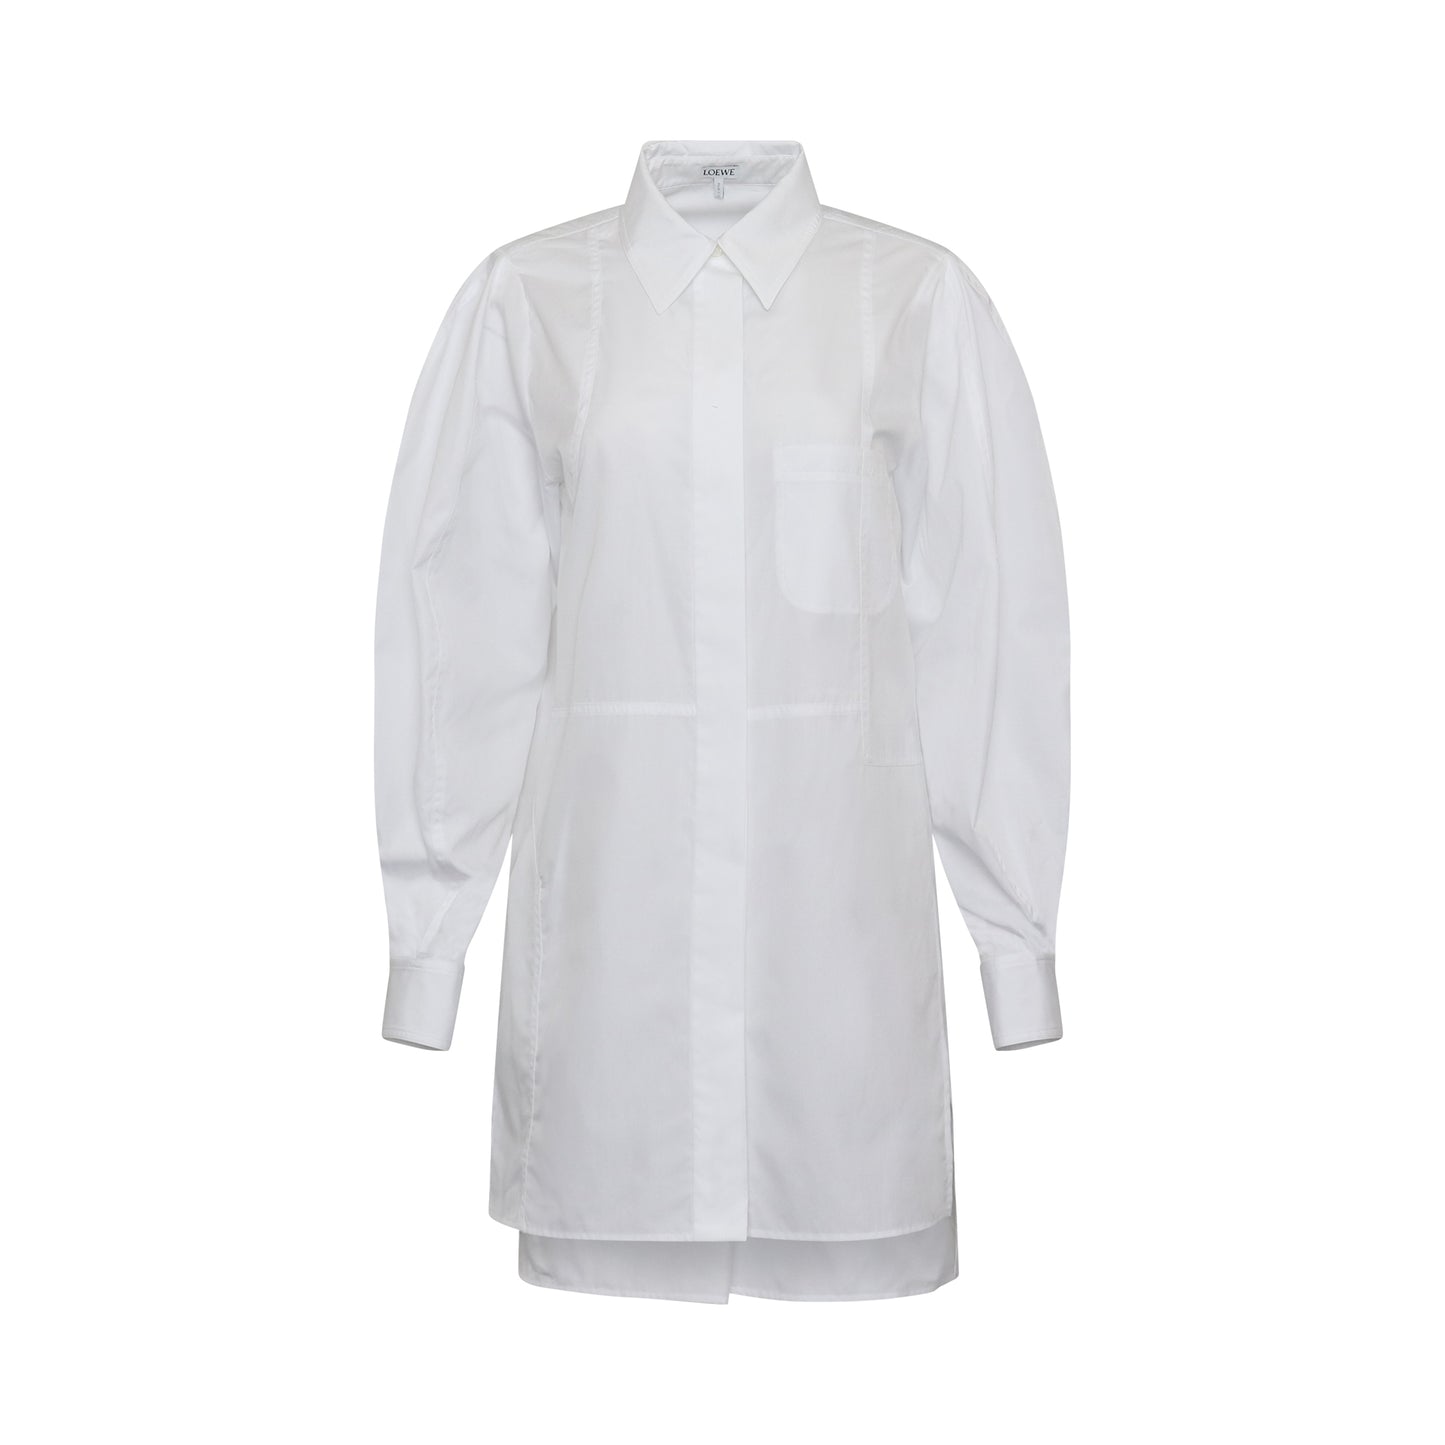 Loewe Patchwork Shirts in White